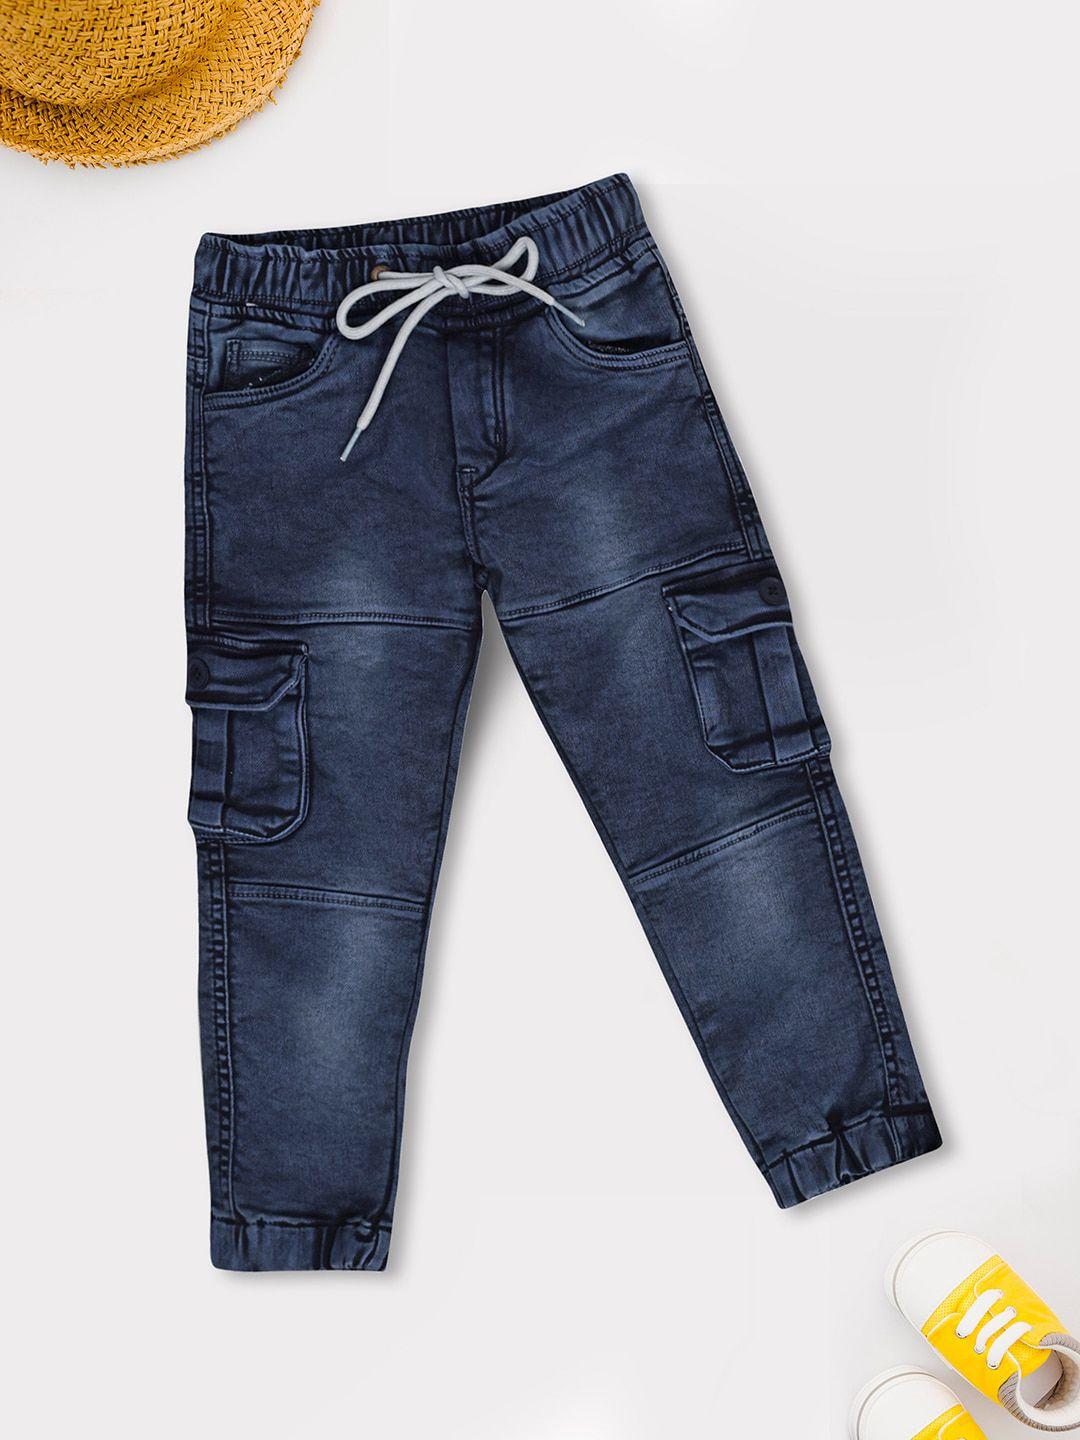 v-mart boys clean look light fade cotton jeans